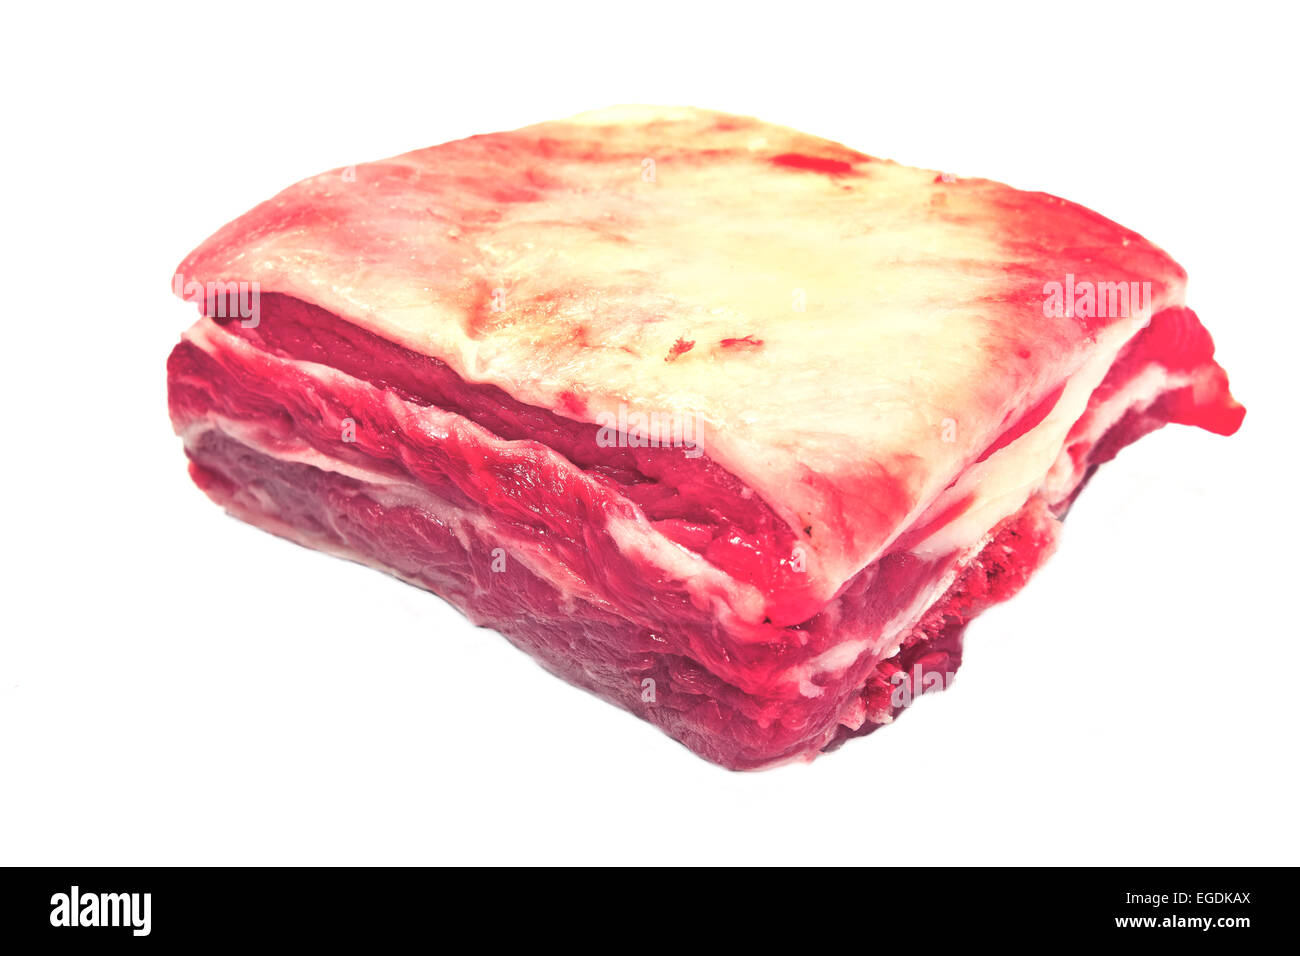 Raw beef ribs on white background Stock Photo